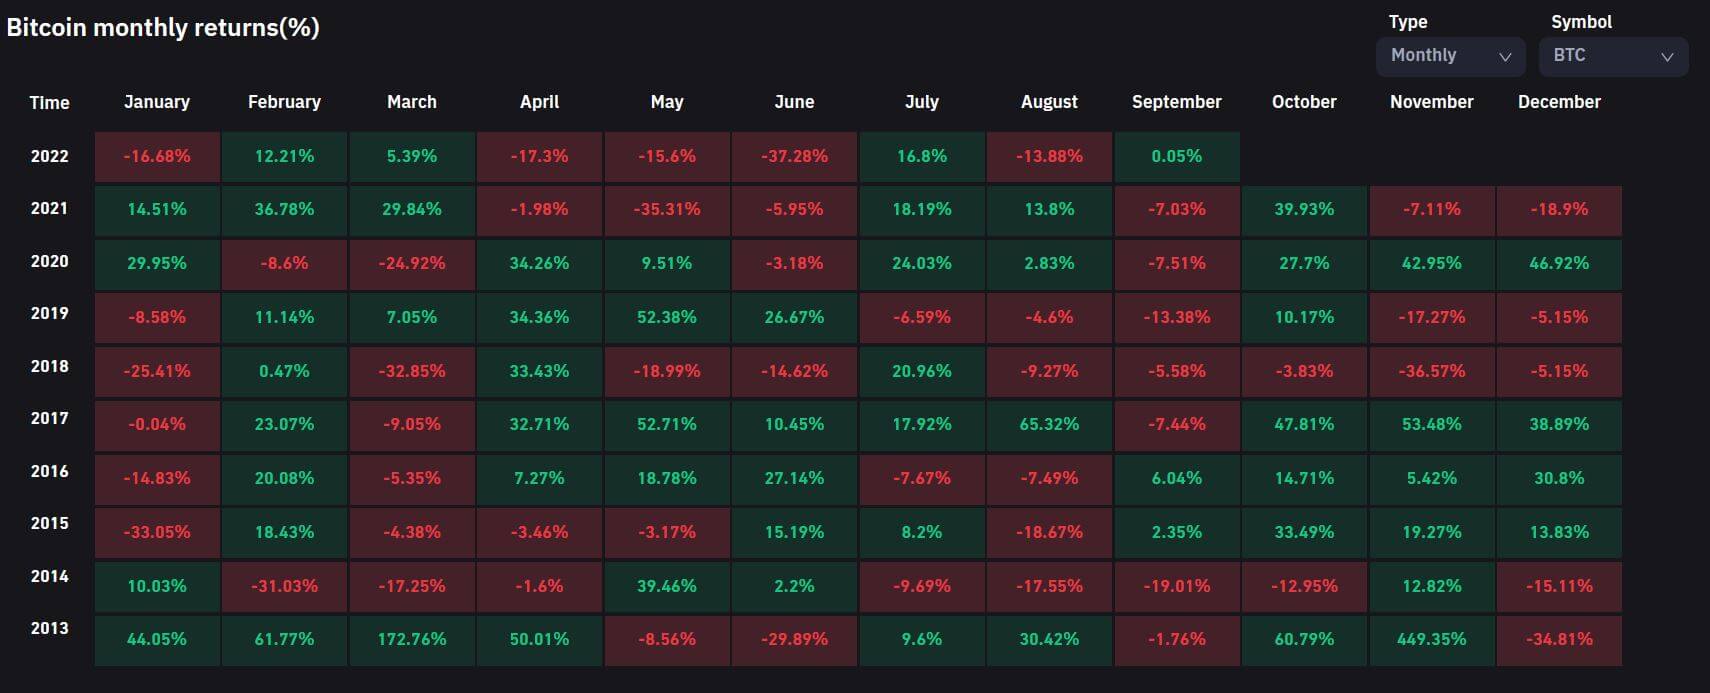  btc 2013 month september historically worst research 